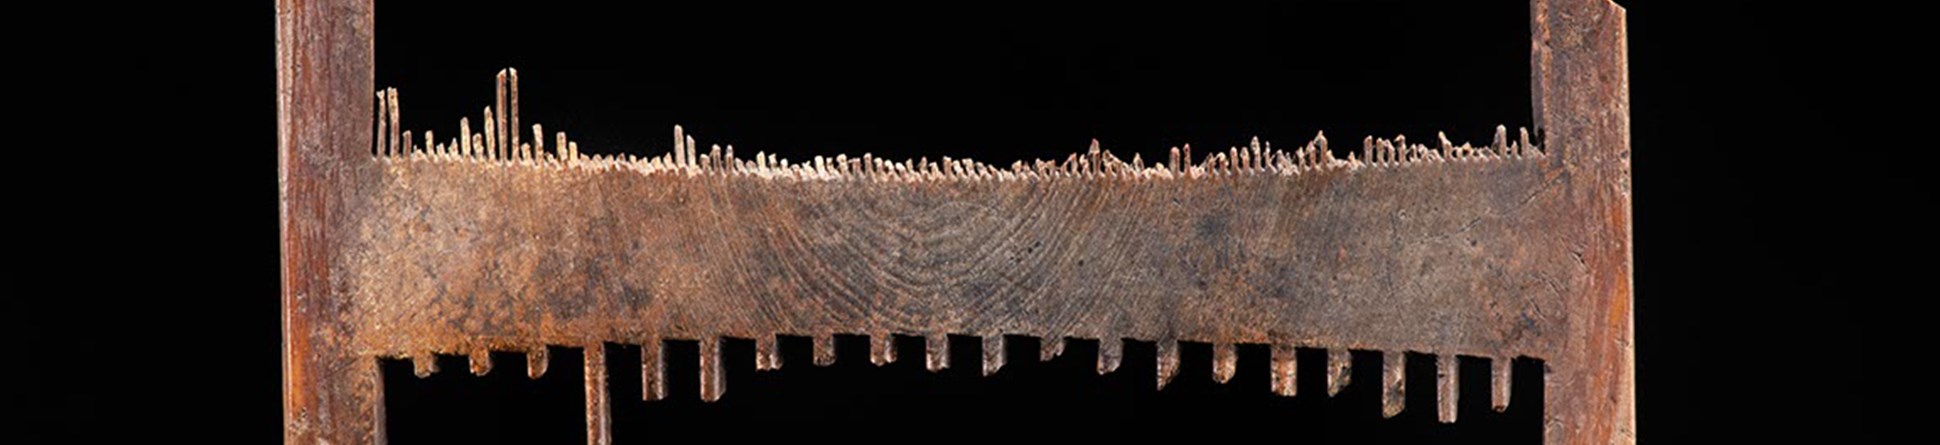 A nit comb which is has lost most of the teeth. The remnants of the teeth show how one side would have been fine-toothed, and the other side had wider spread teeth.